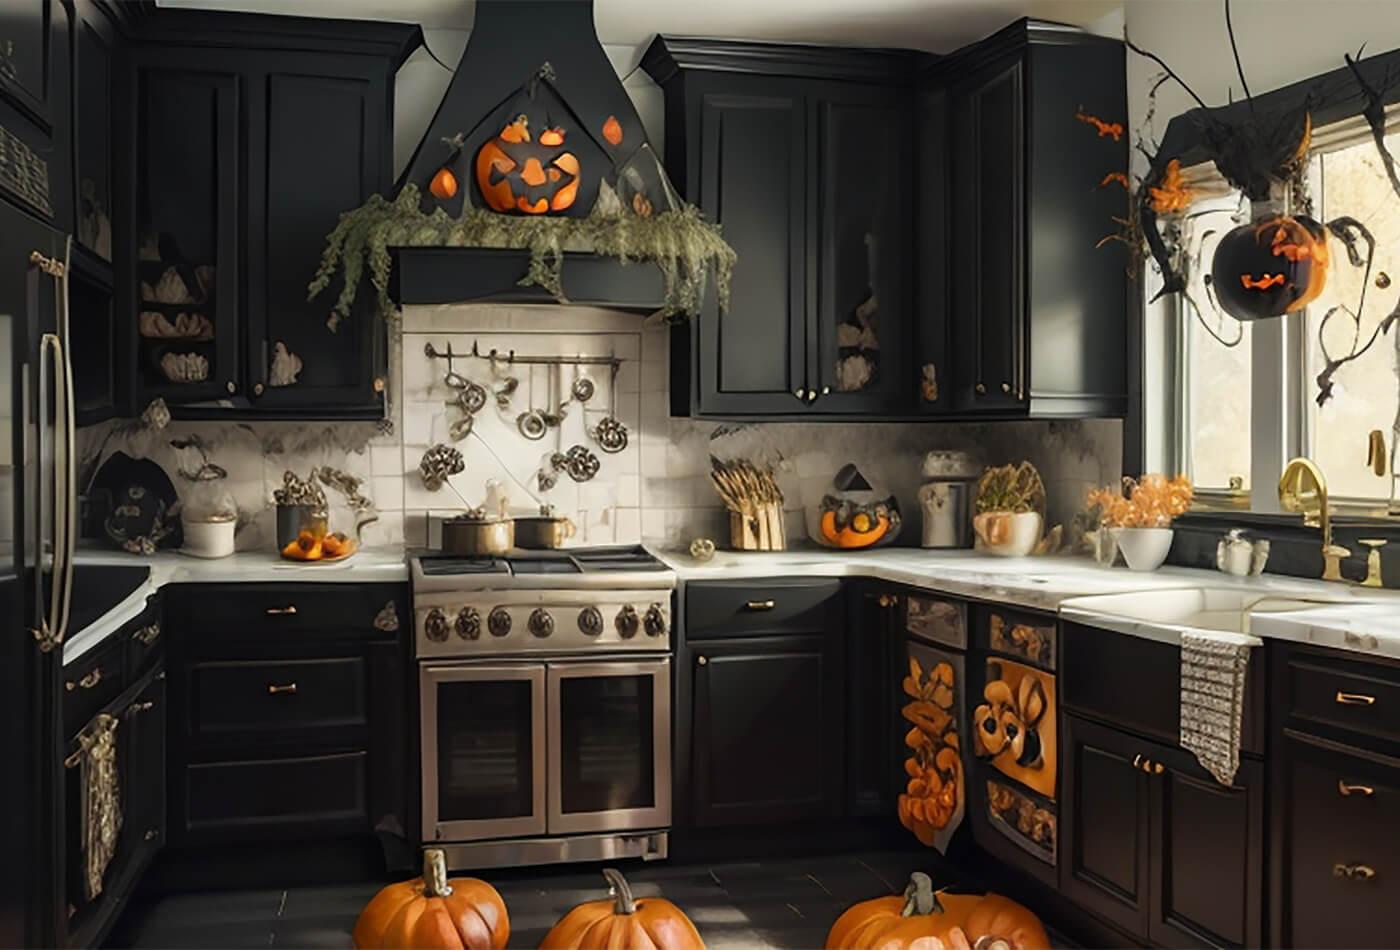 https://app.dropinblog.com/uploaded/blogs/34246798/files/Dark_Kitchen_Cabinets_That_Goes_Well_With_Our_Upcoming_Halloween_Season_1.jpg